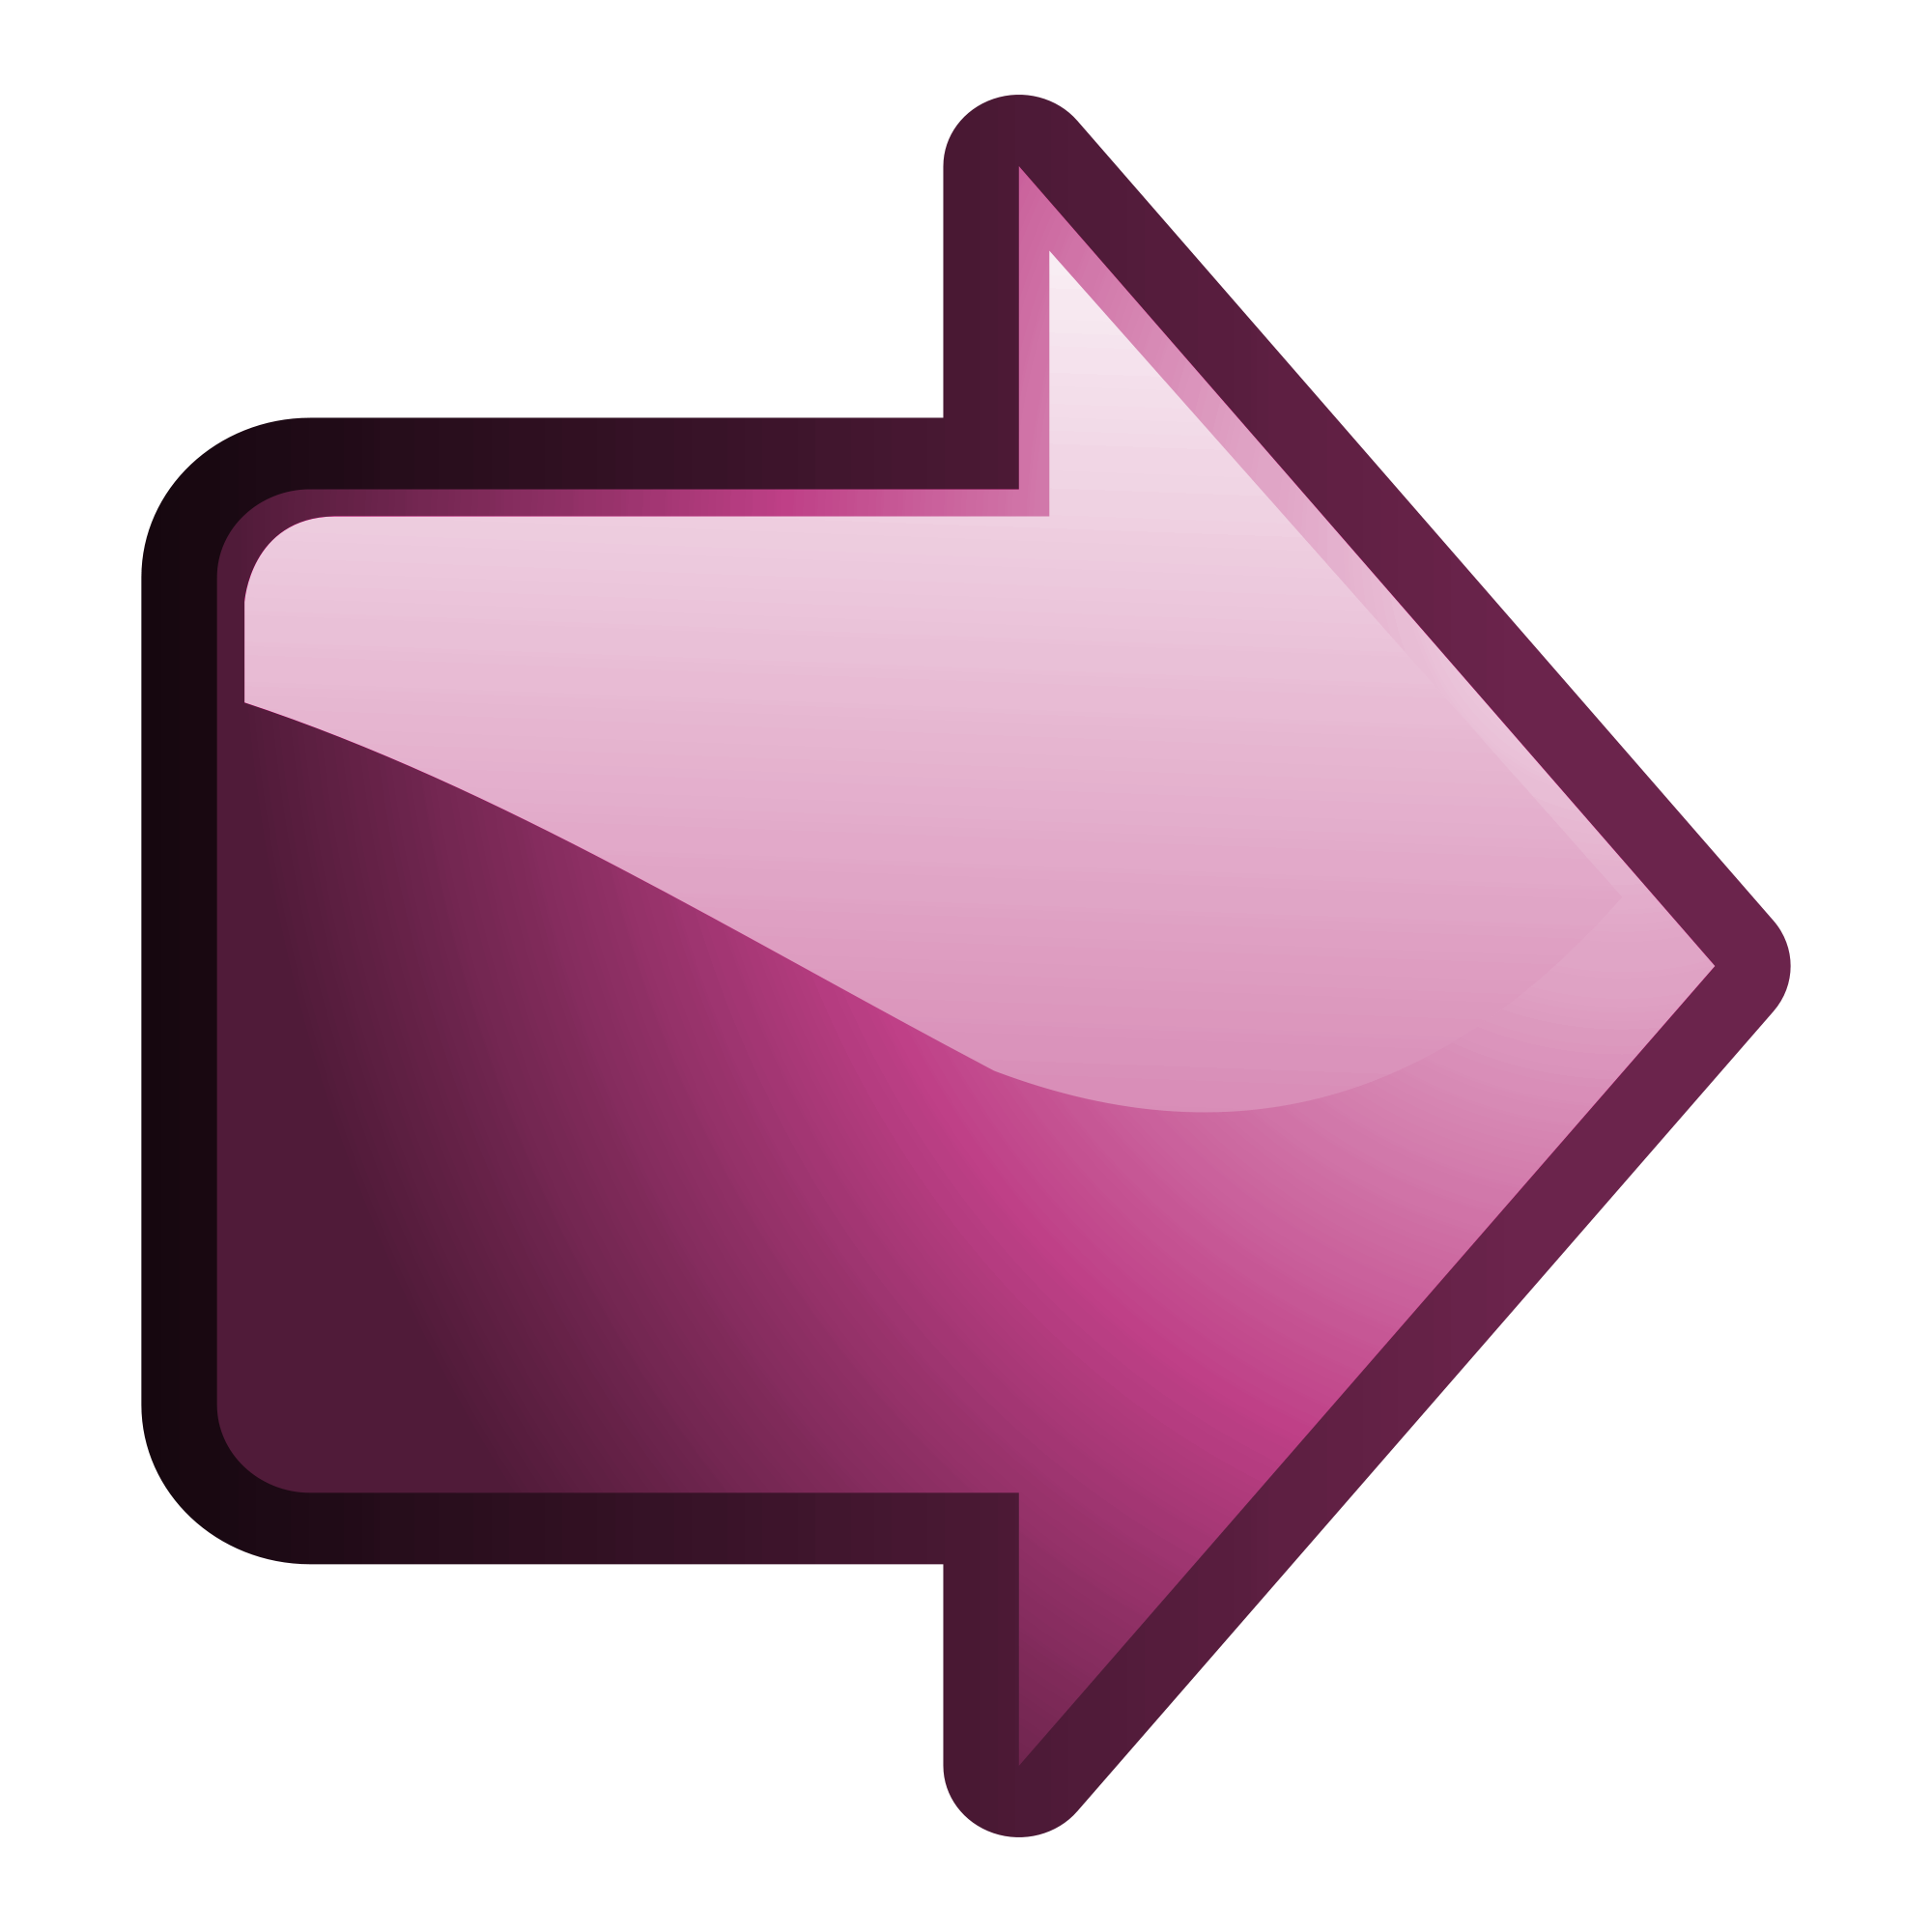 File:Nuvola arrow right pink.png - Wikimedia Commons